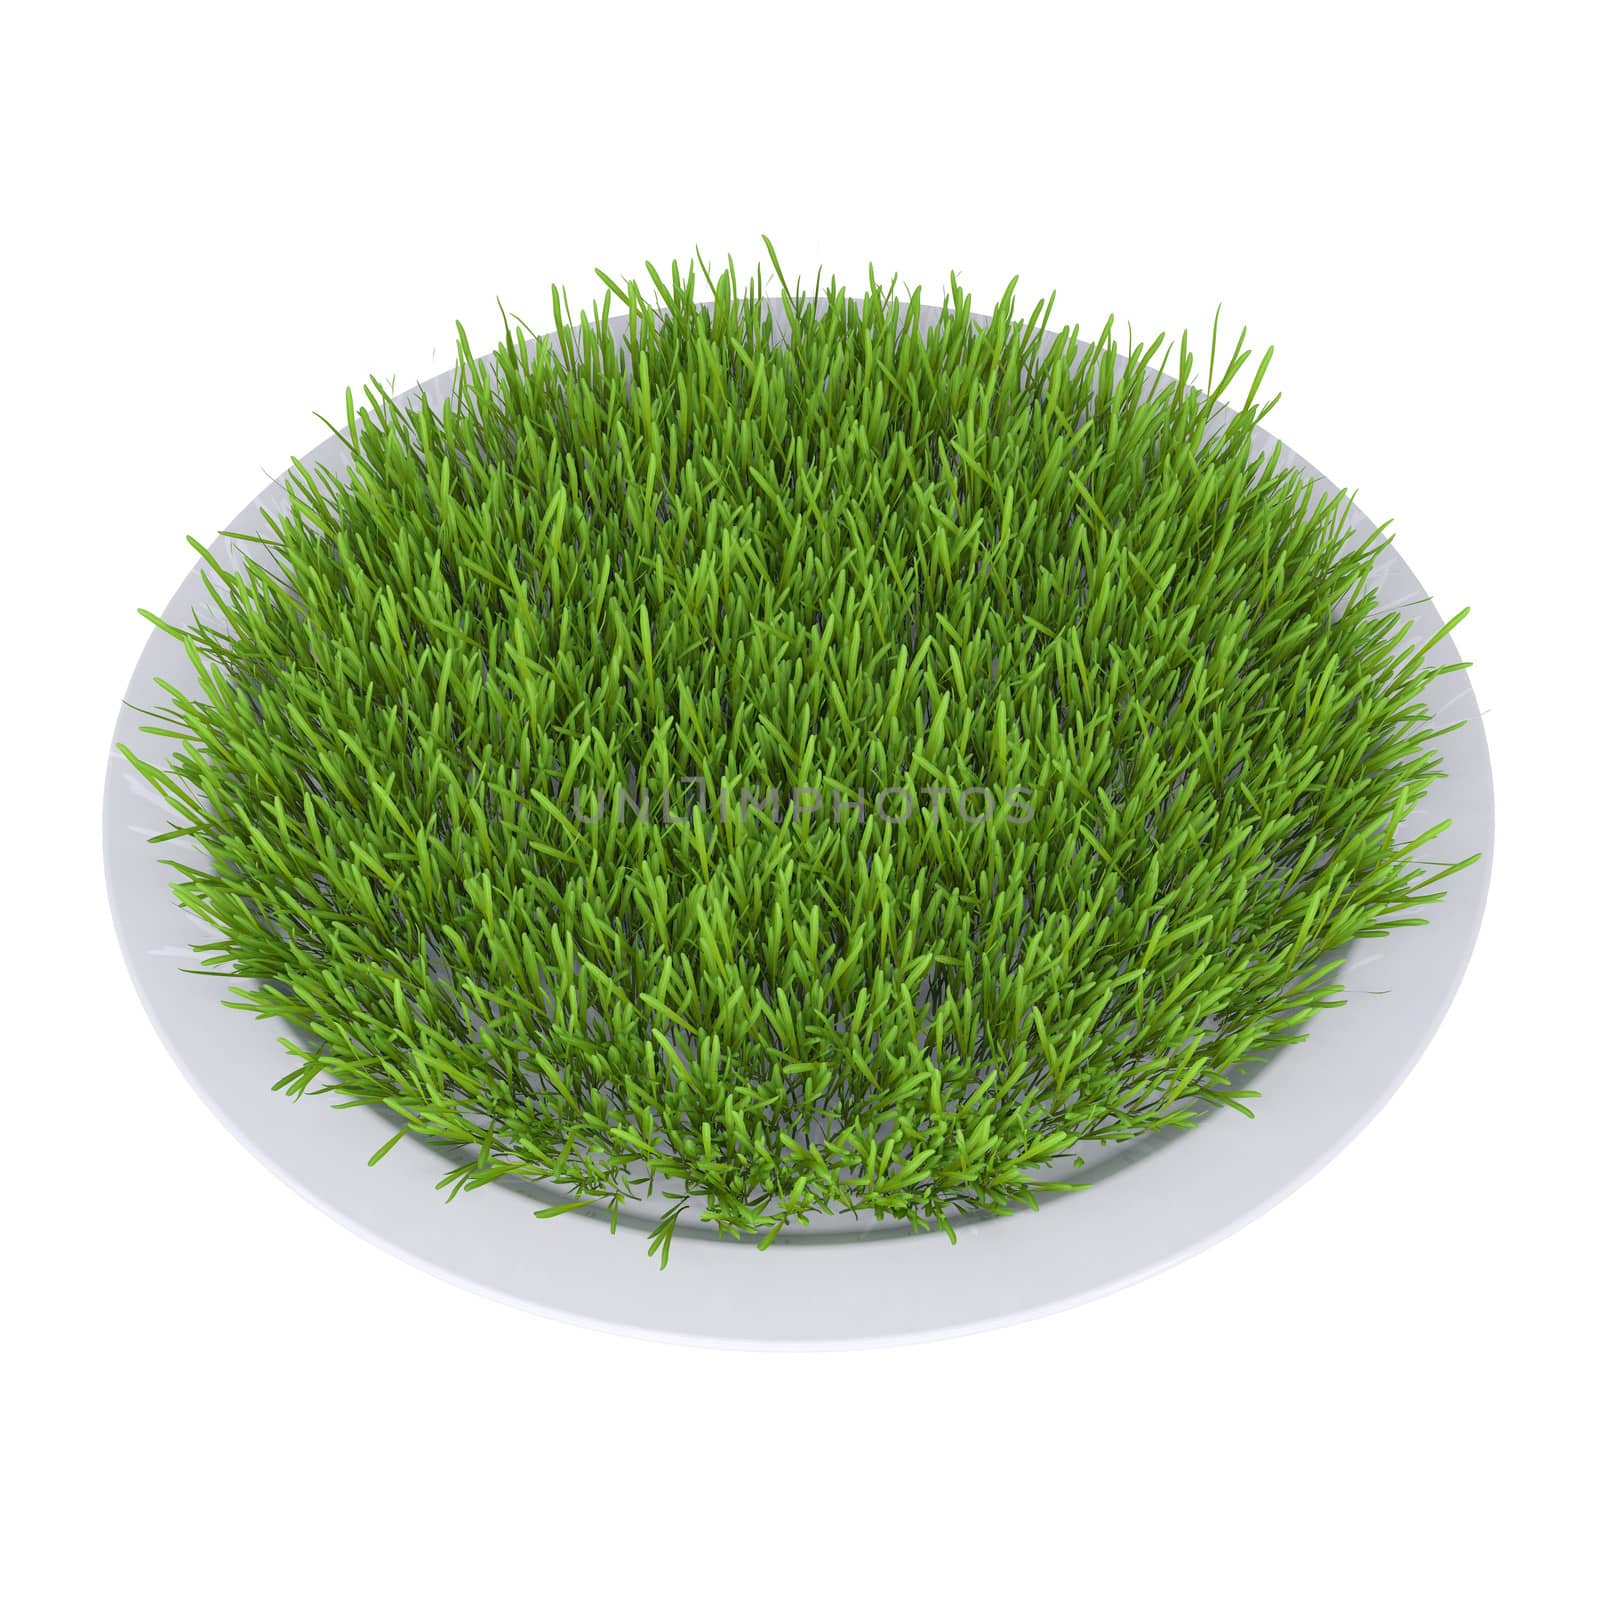 Green grass on a plate. Isolated render on a white background